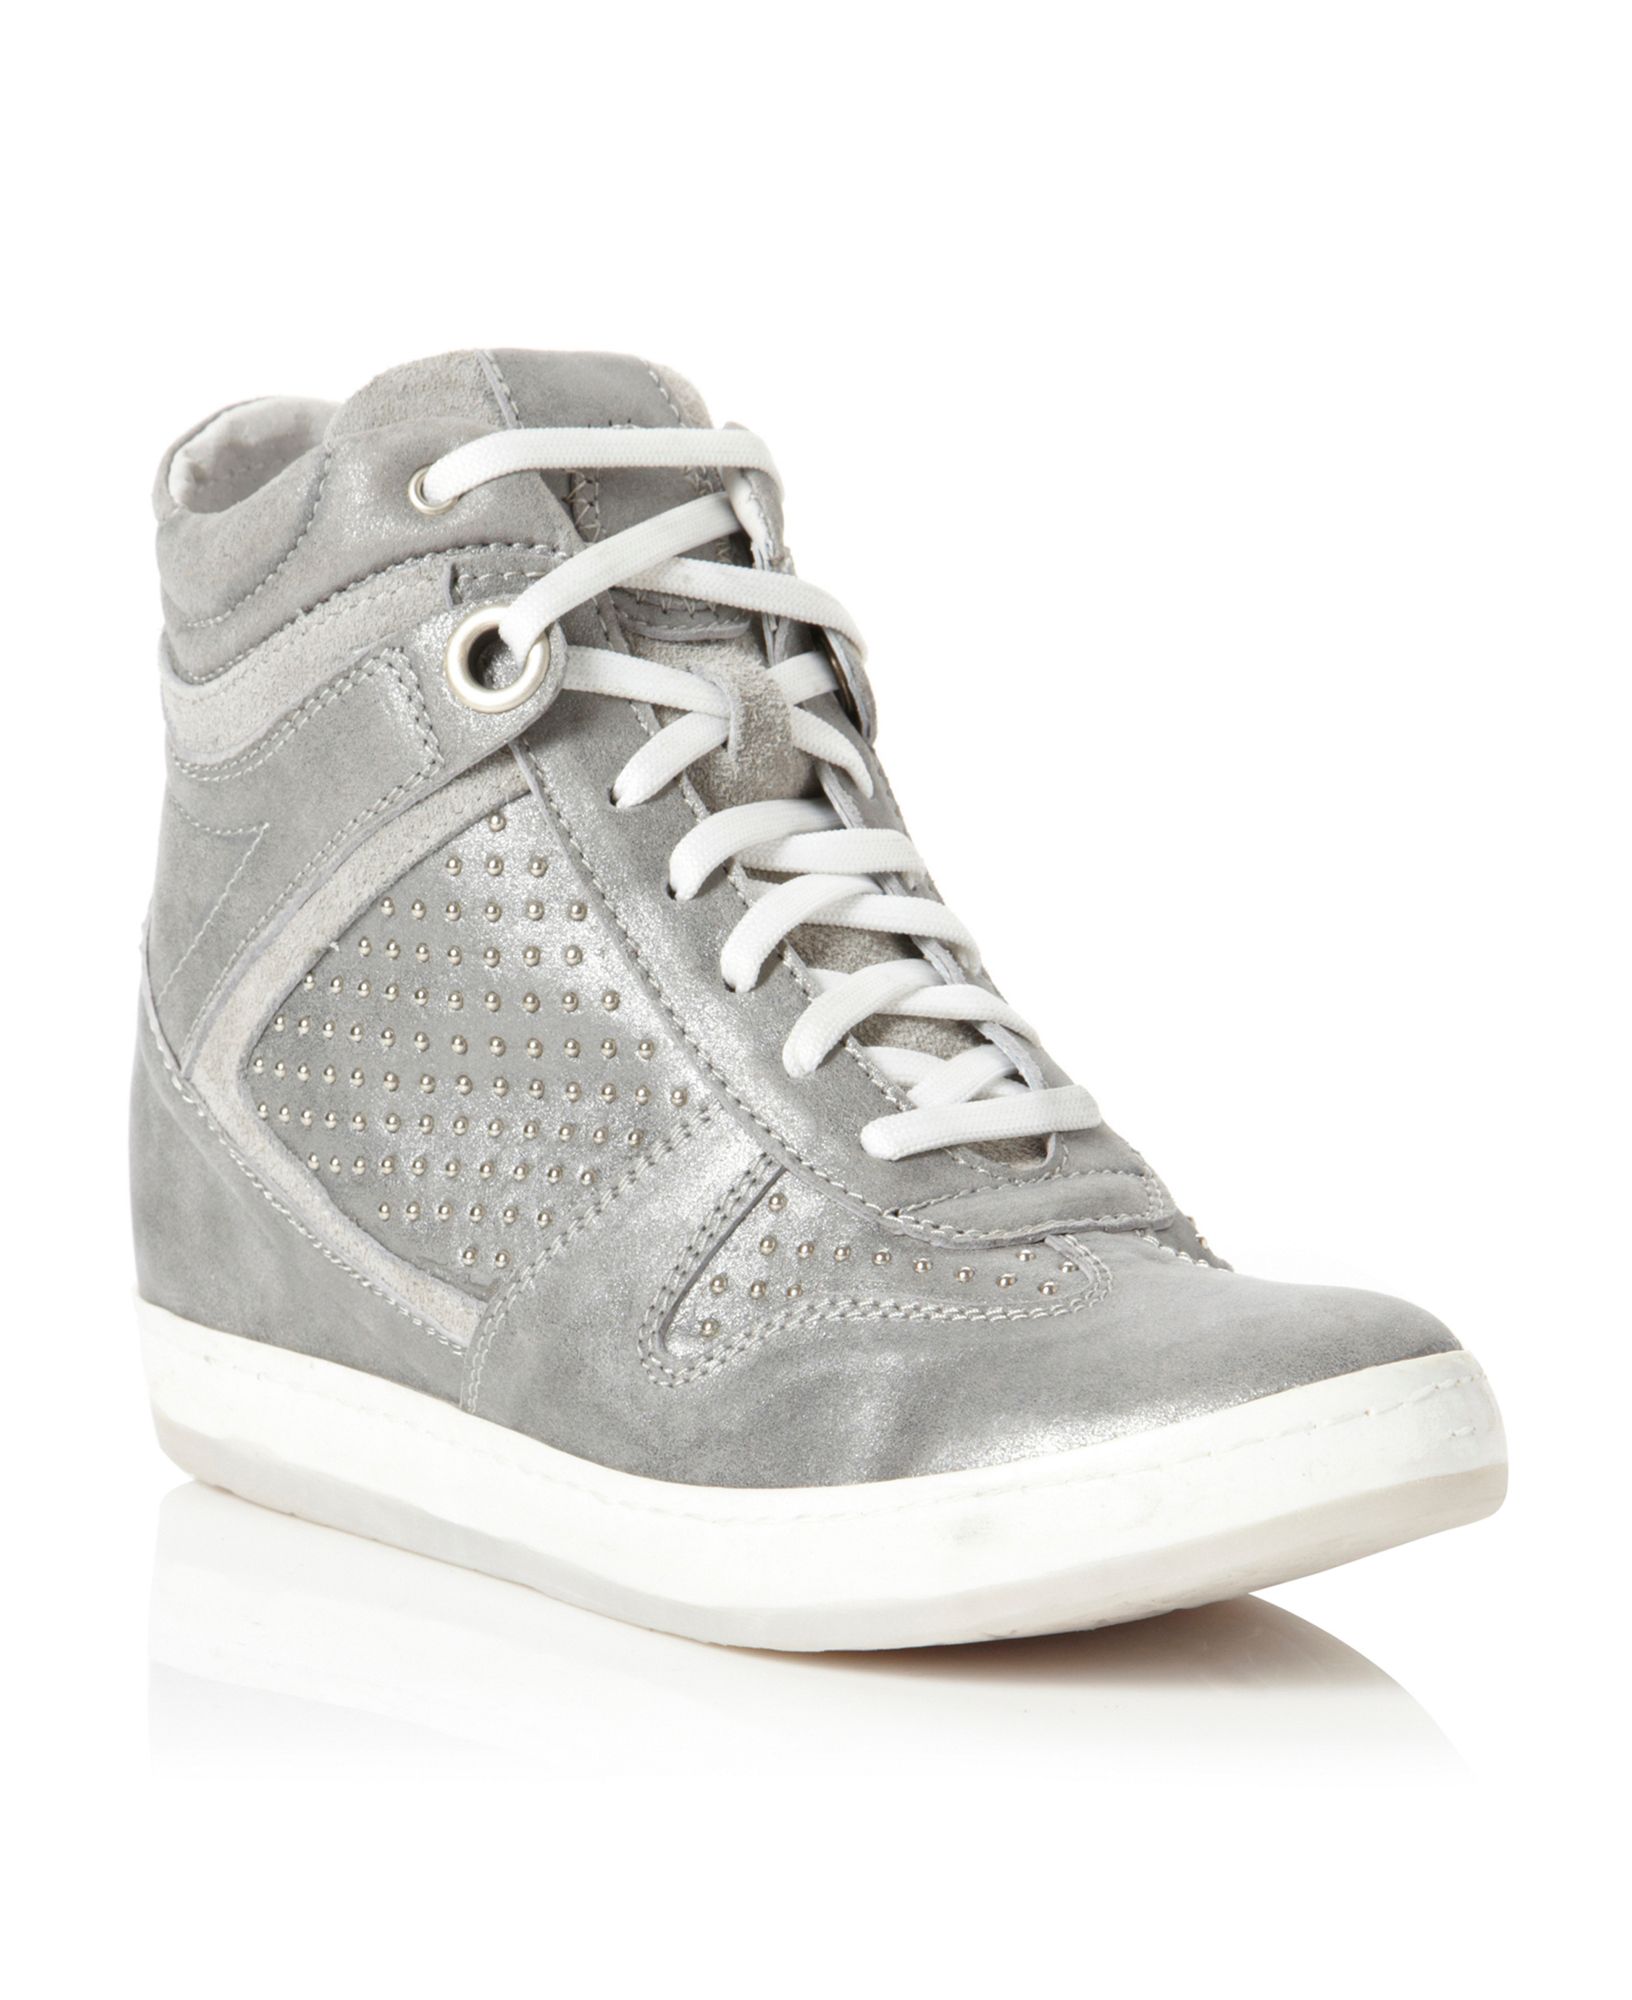 Dune Limelight Concealed Wedge Stud Lace Up Shoes in Silver (Pewter) | Lyst